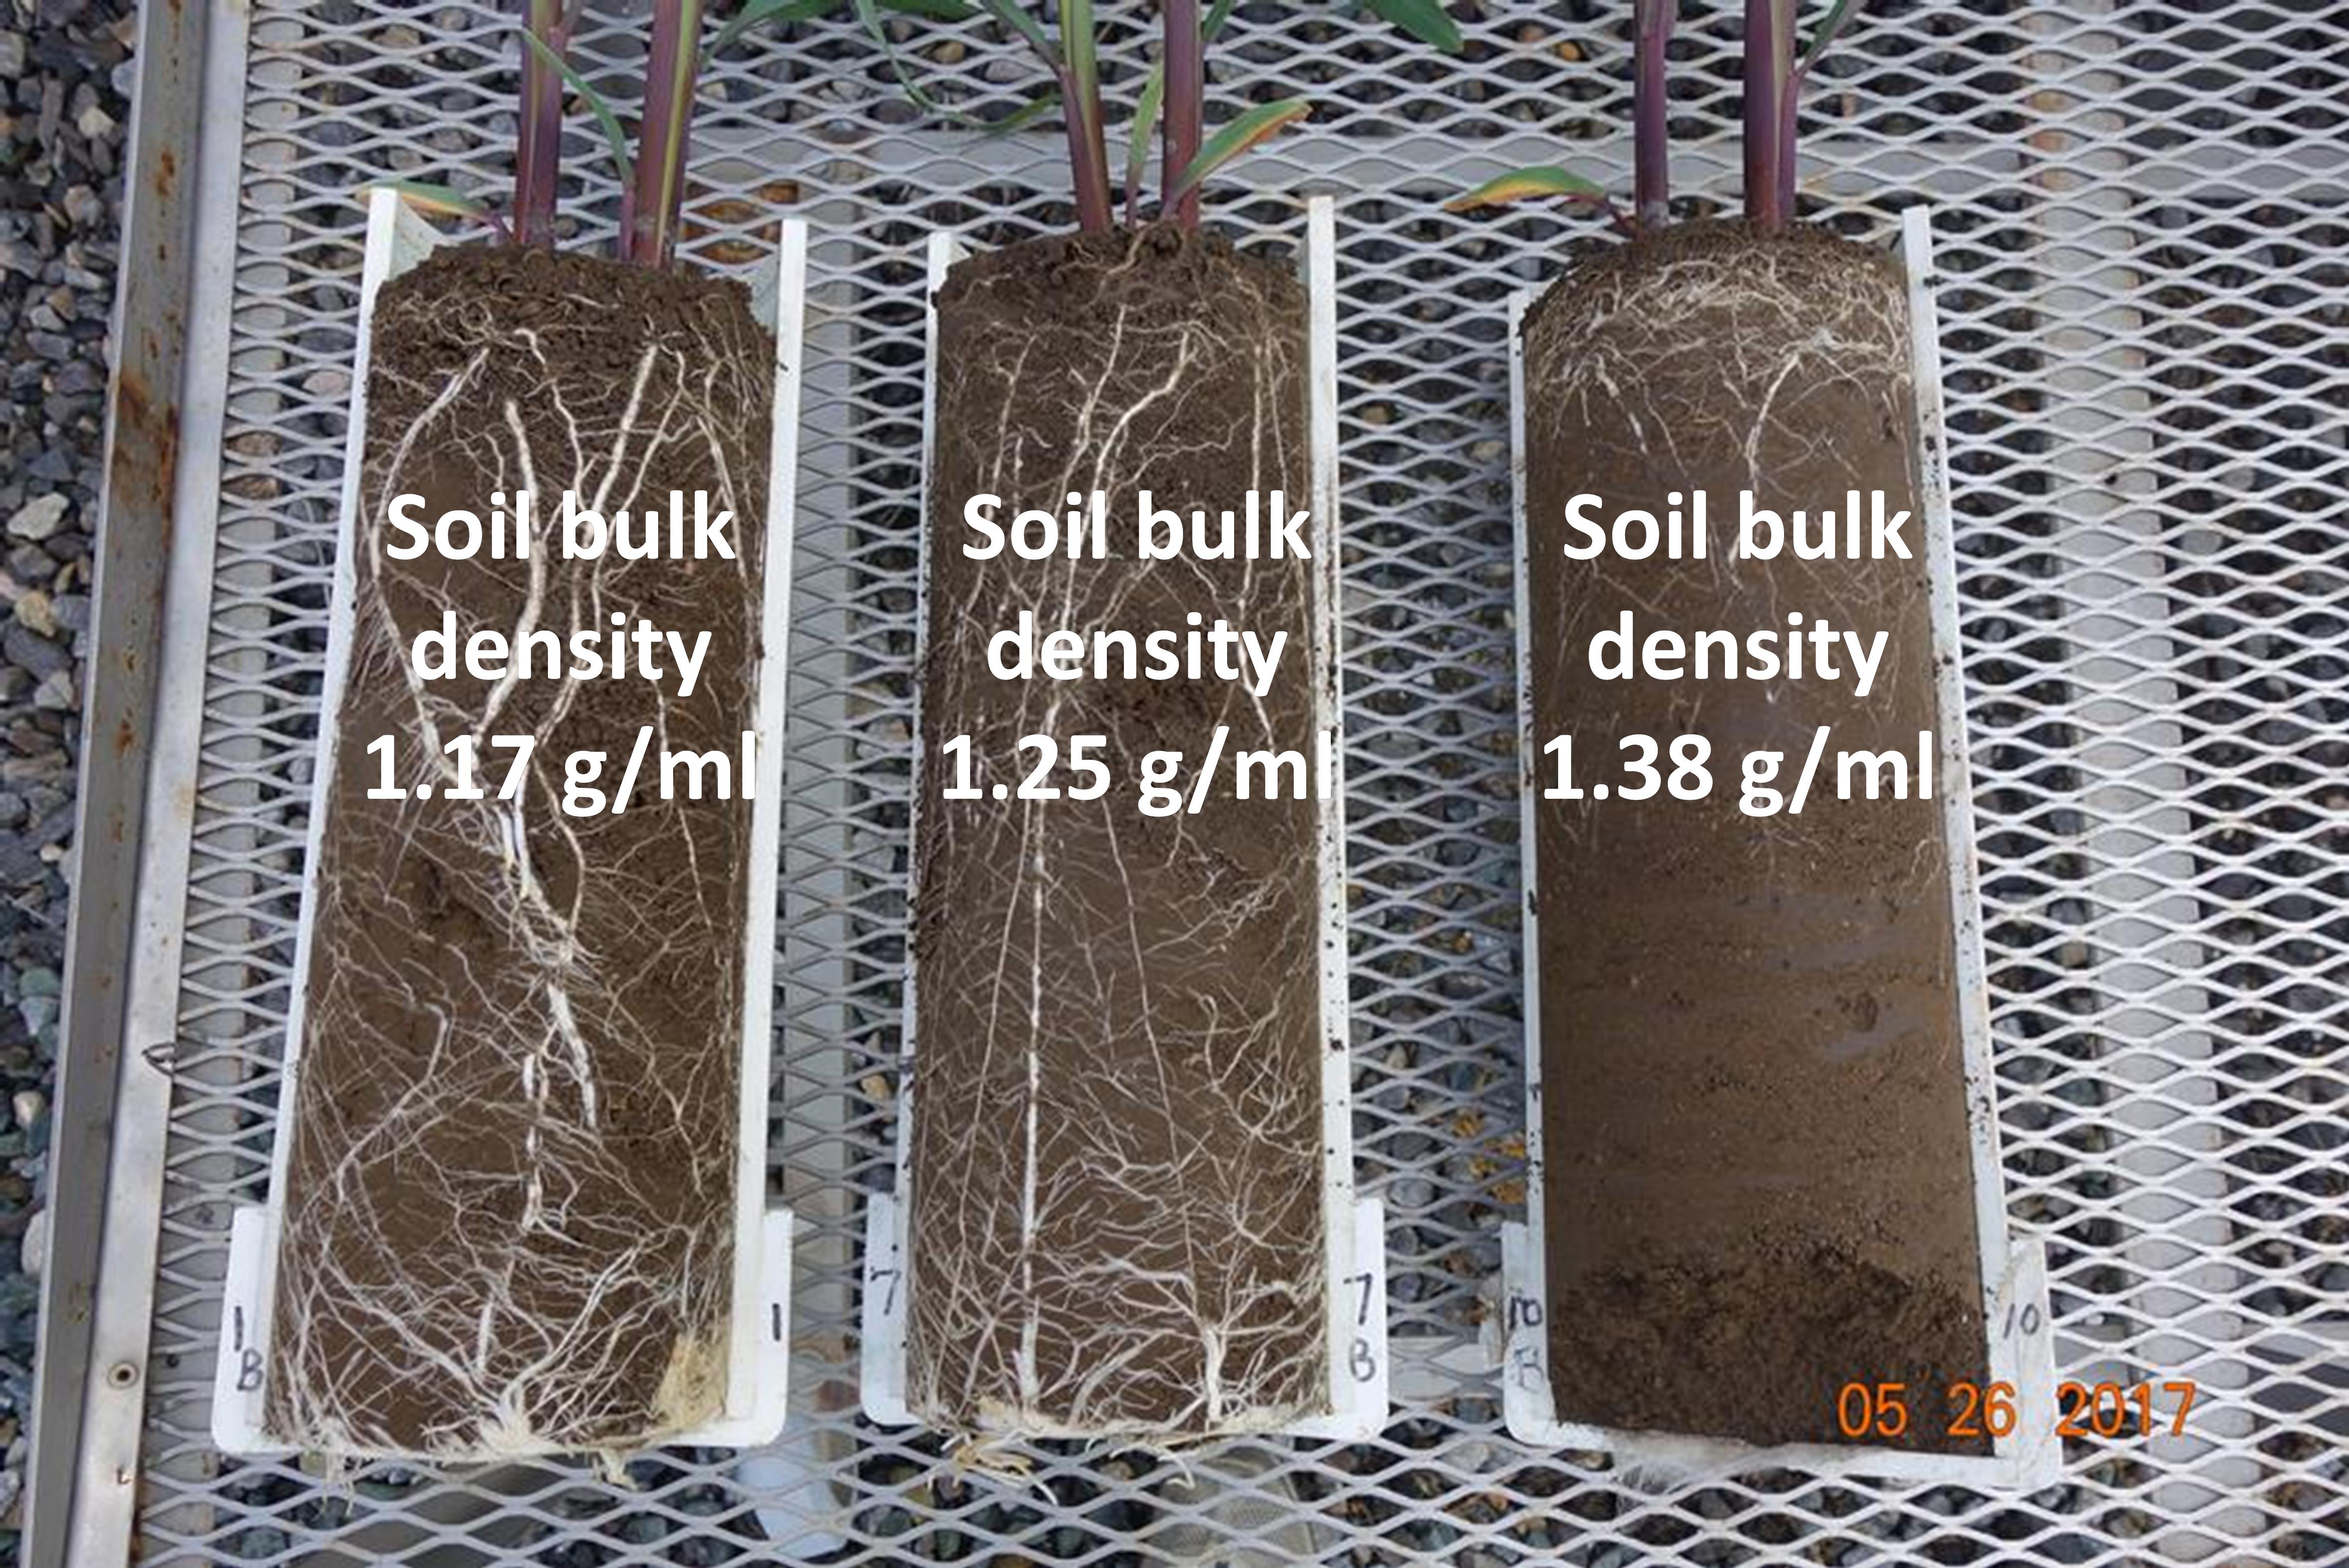 Root growth of corn plants (V5 growth stage) growing in soil compacted to different bulk densities before corn seeds were planted